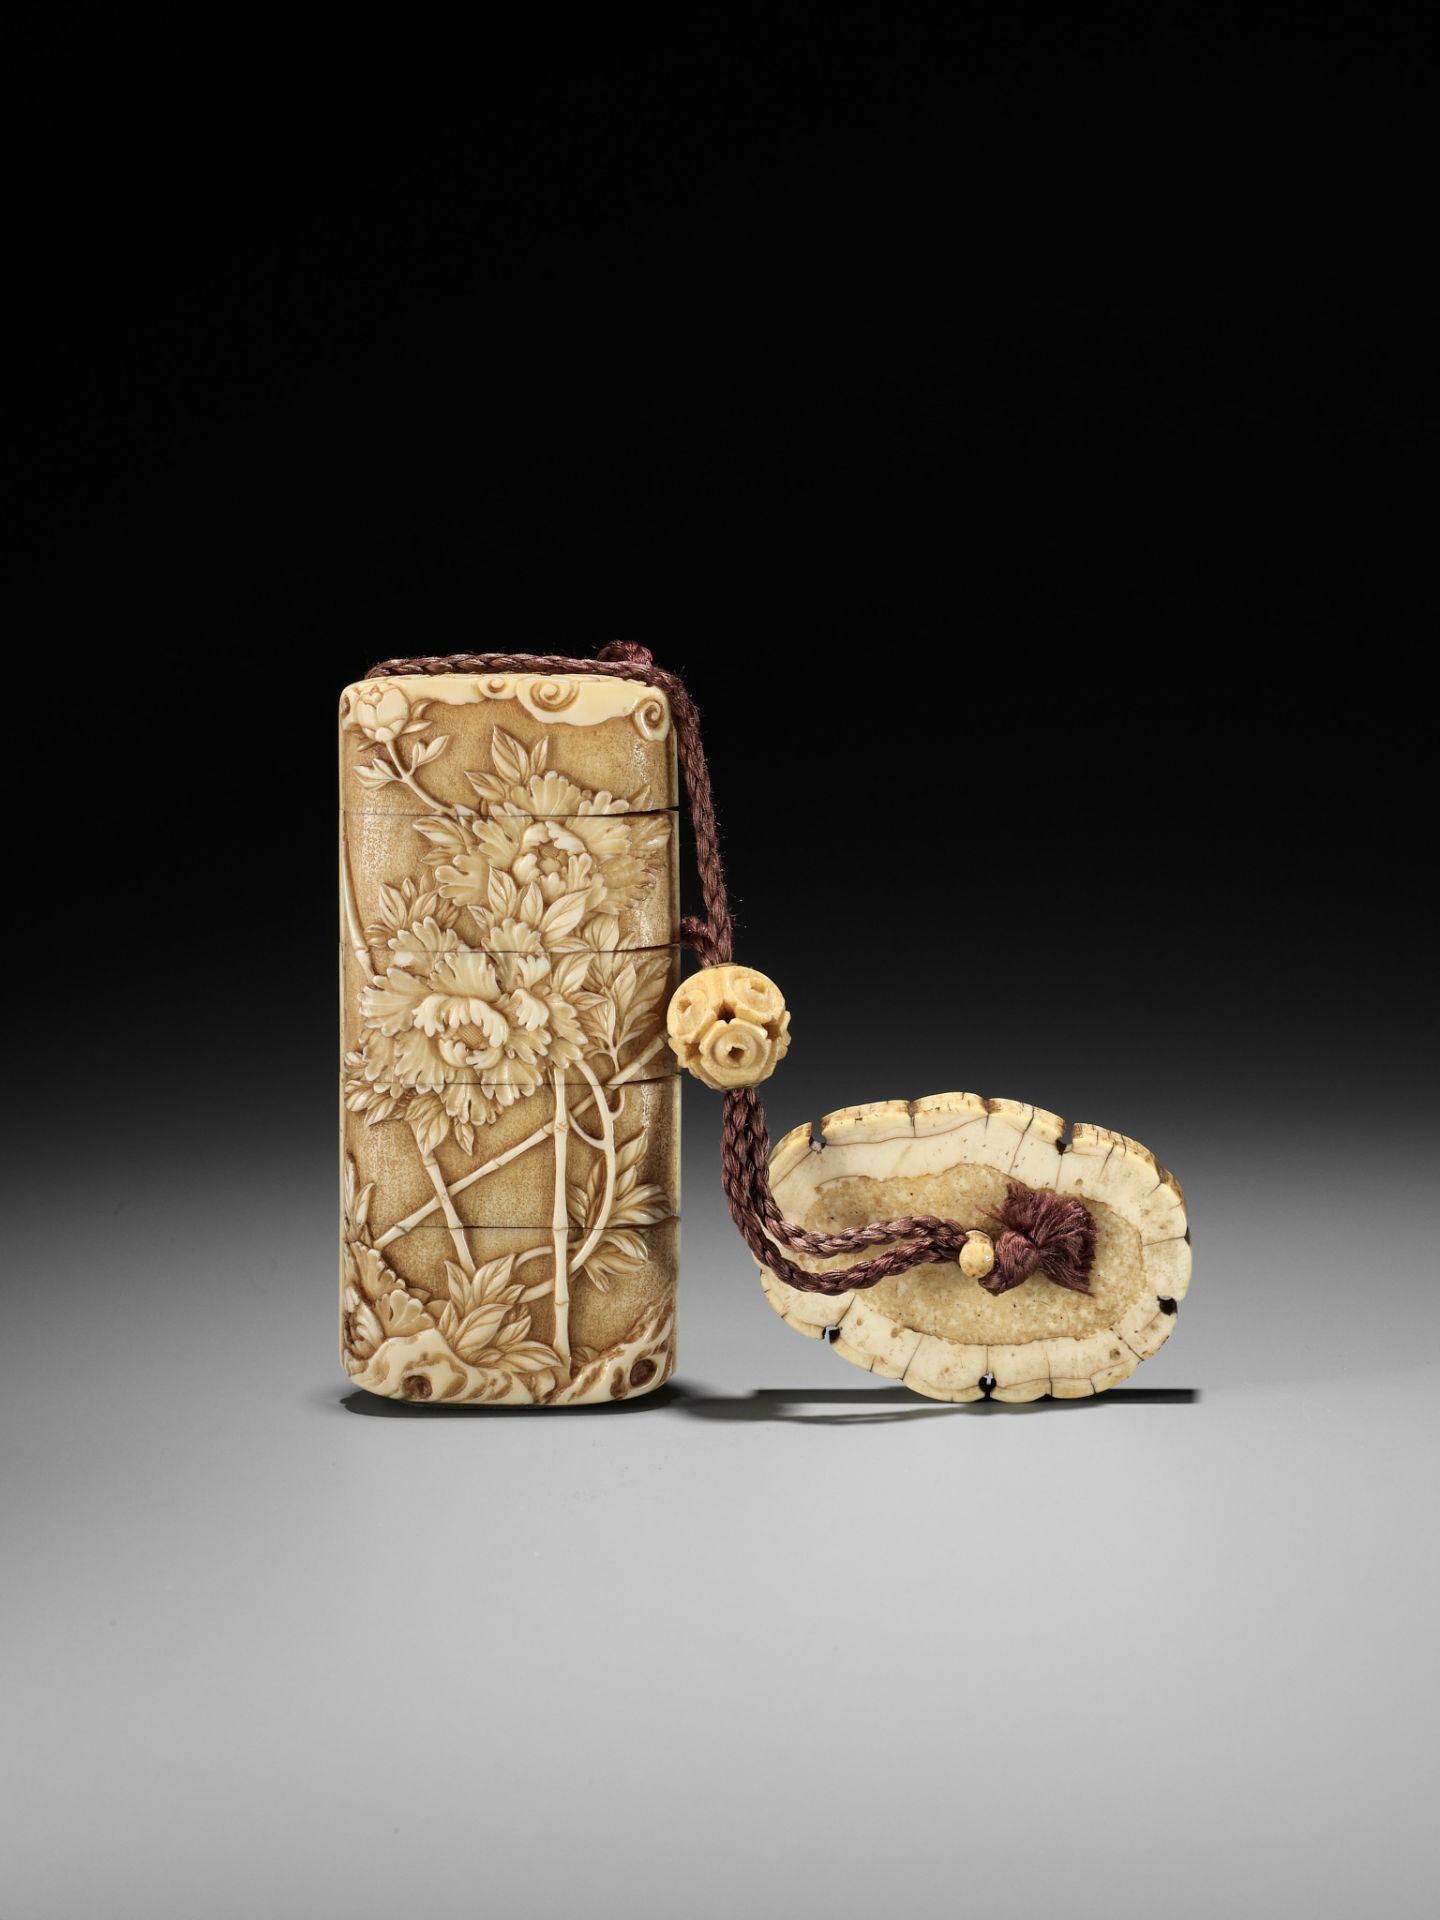 A MASTERFUL WALRUS TUSK FOUR-CASE INRO DEPICTING A SWALLOW AMONGST FLOWERS - Image 8 of 12